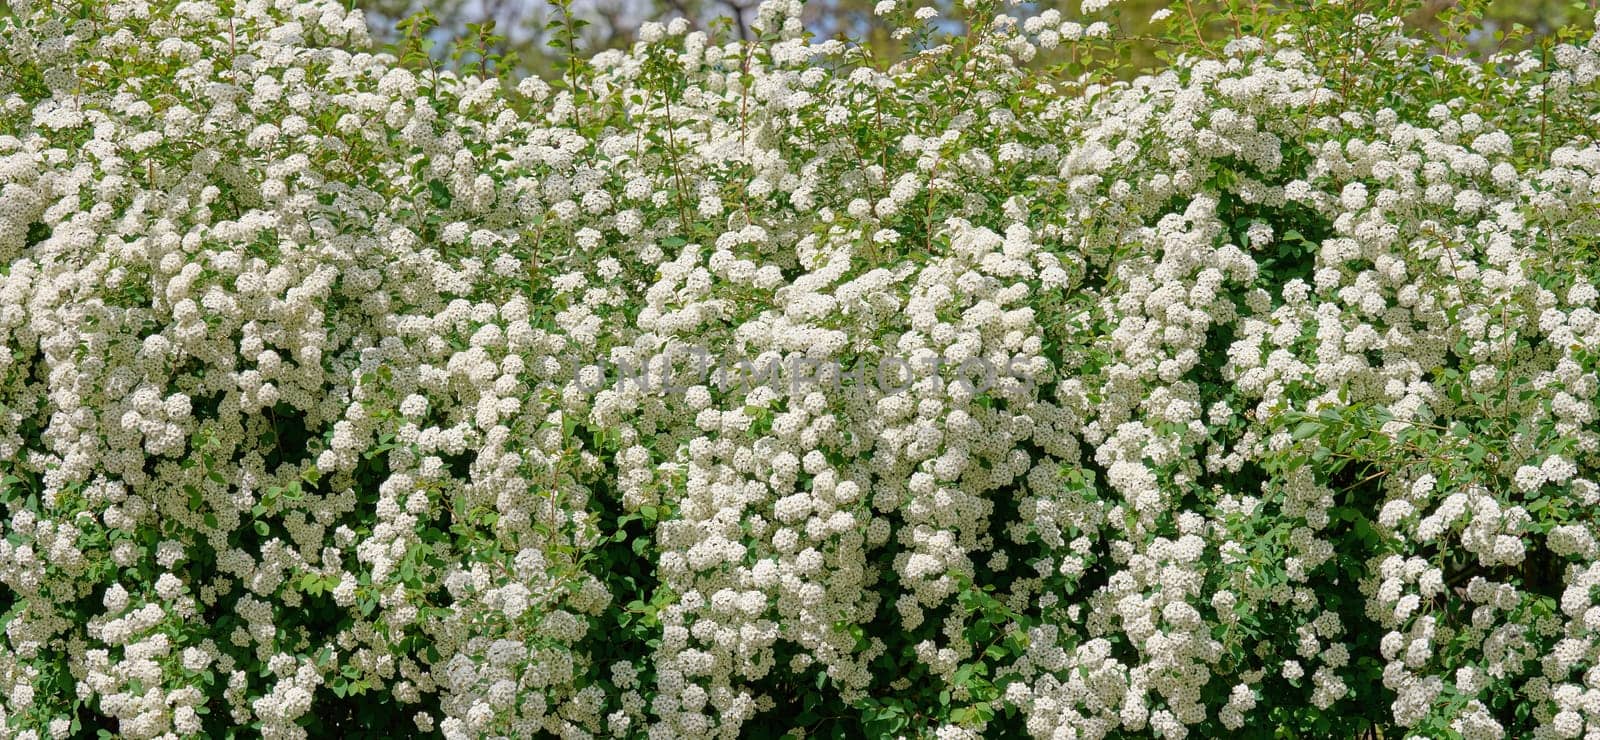 Spirea bushes with white flowers on a spring day by ndanko